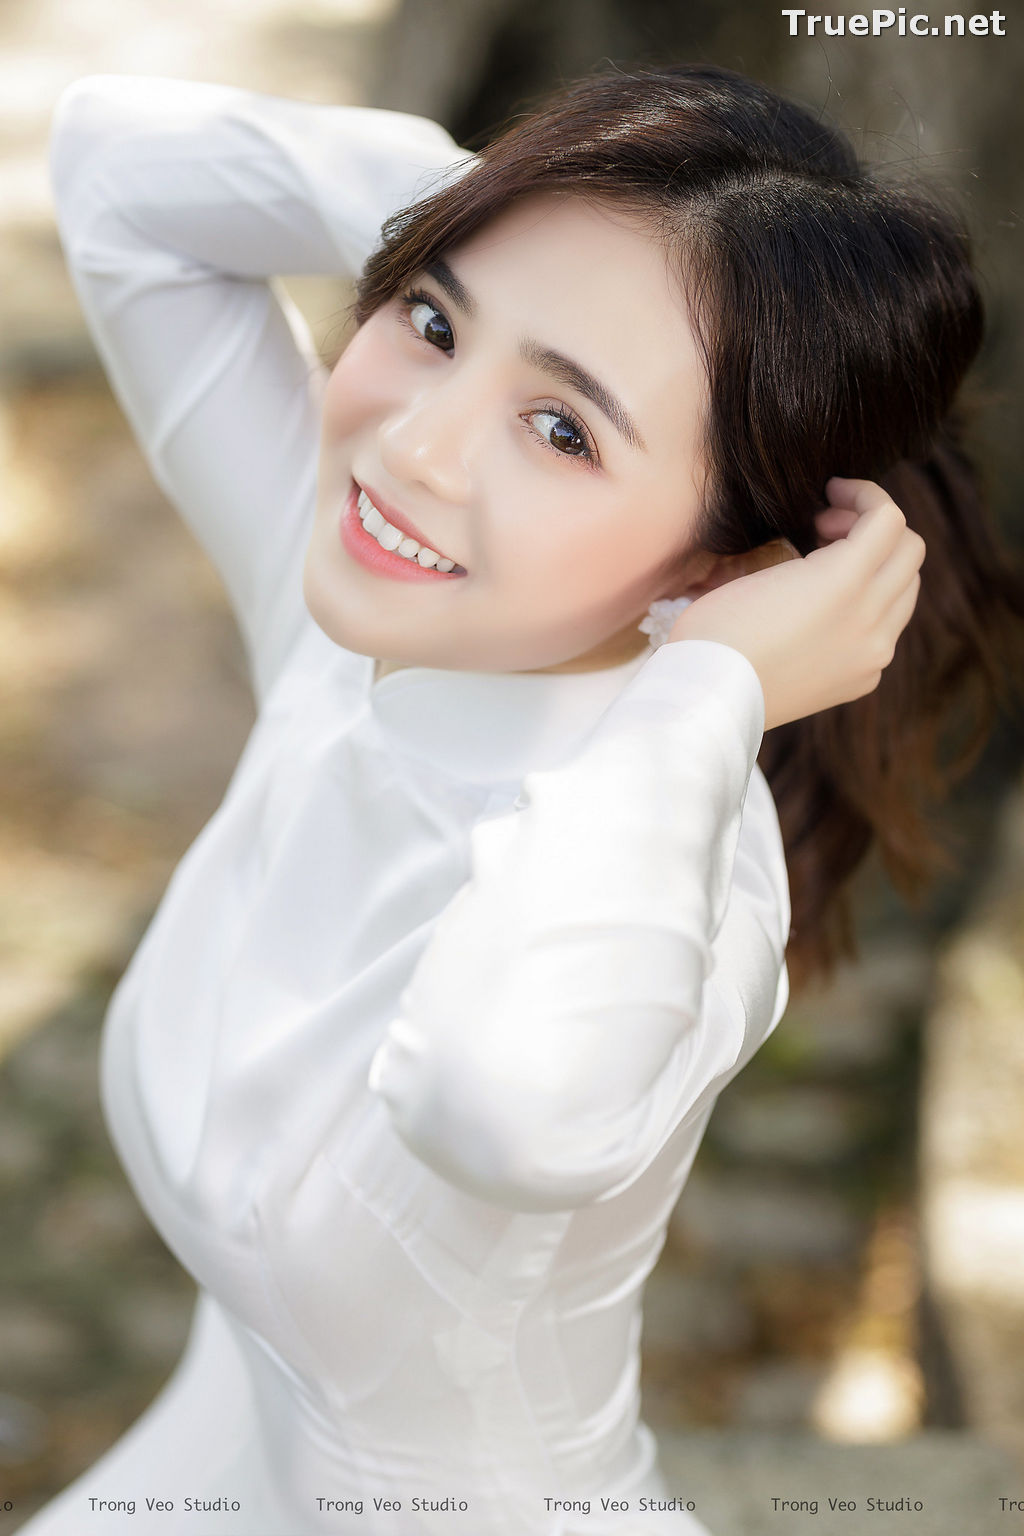 Image The Beauty of Vietnamese Girls with Traditional Dress (Ao Dai) #4 - TruePic.net - Picture-43